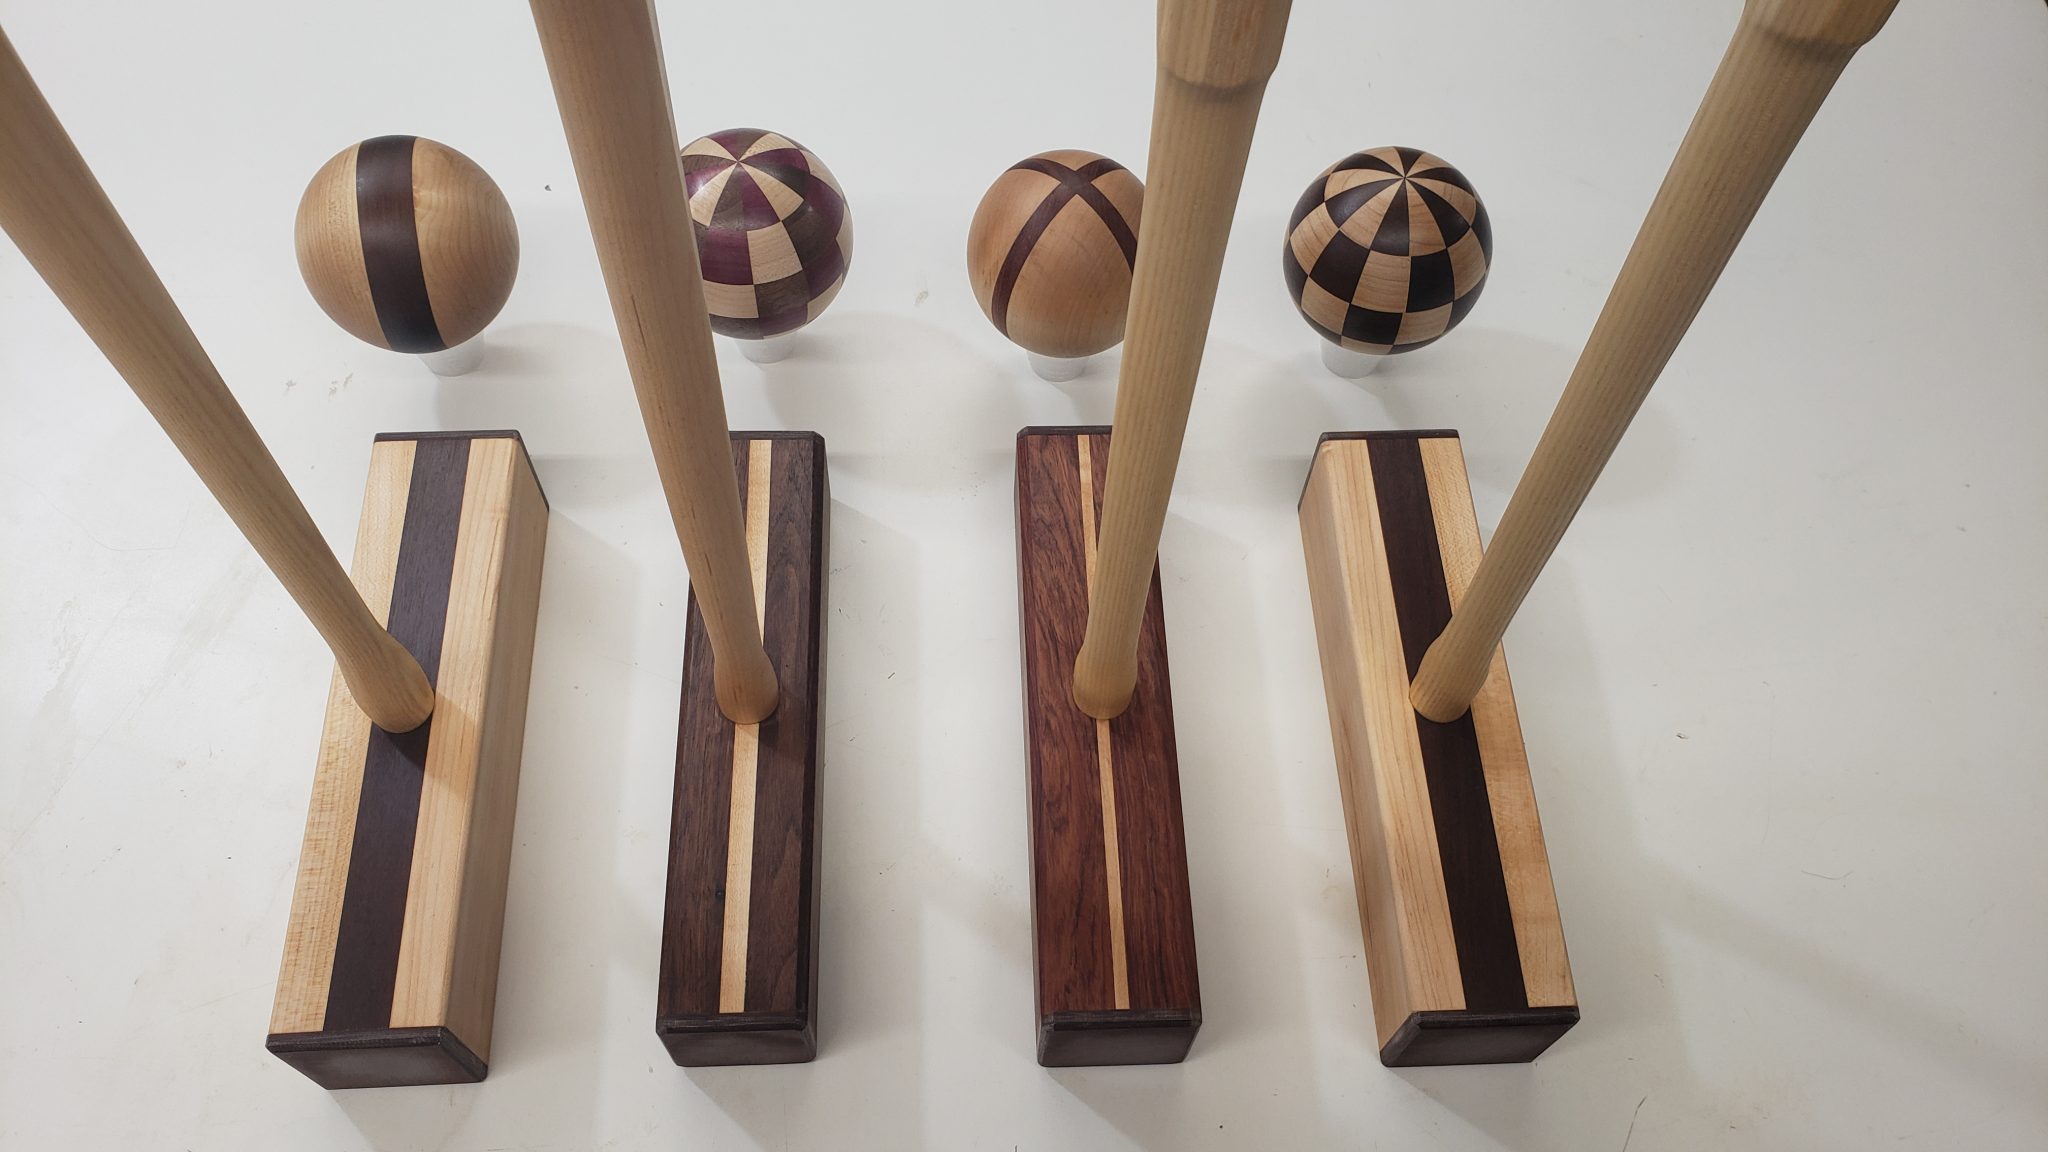 Croquet set made with varied woods